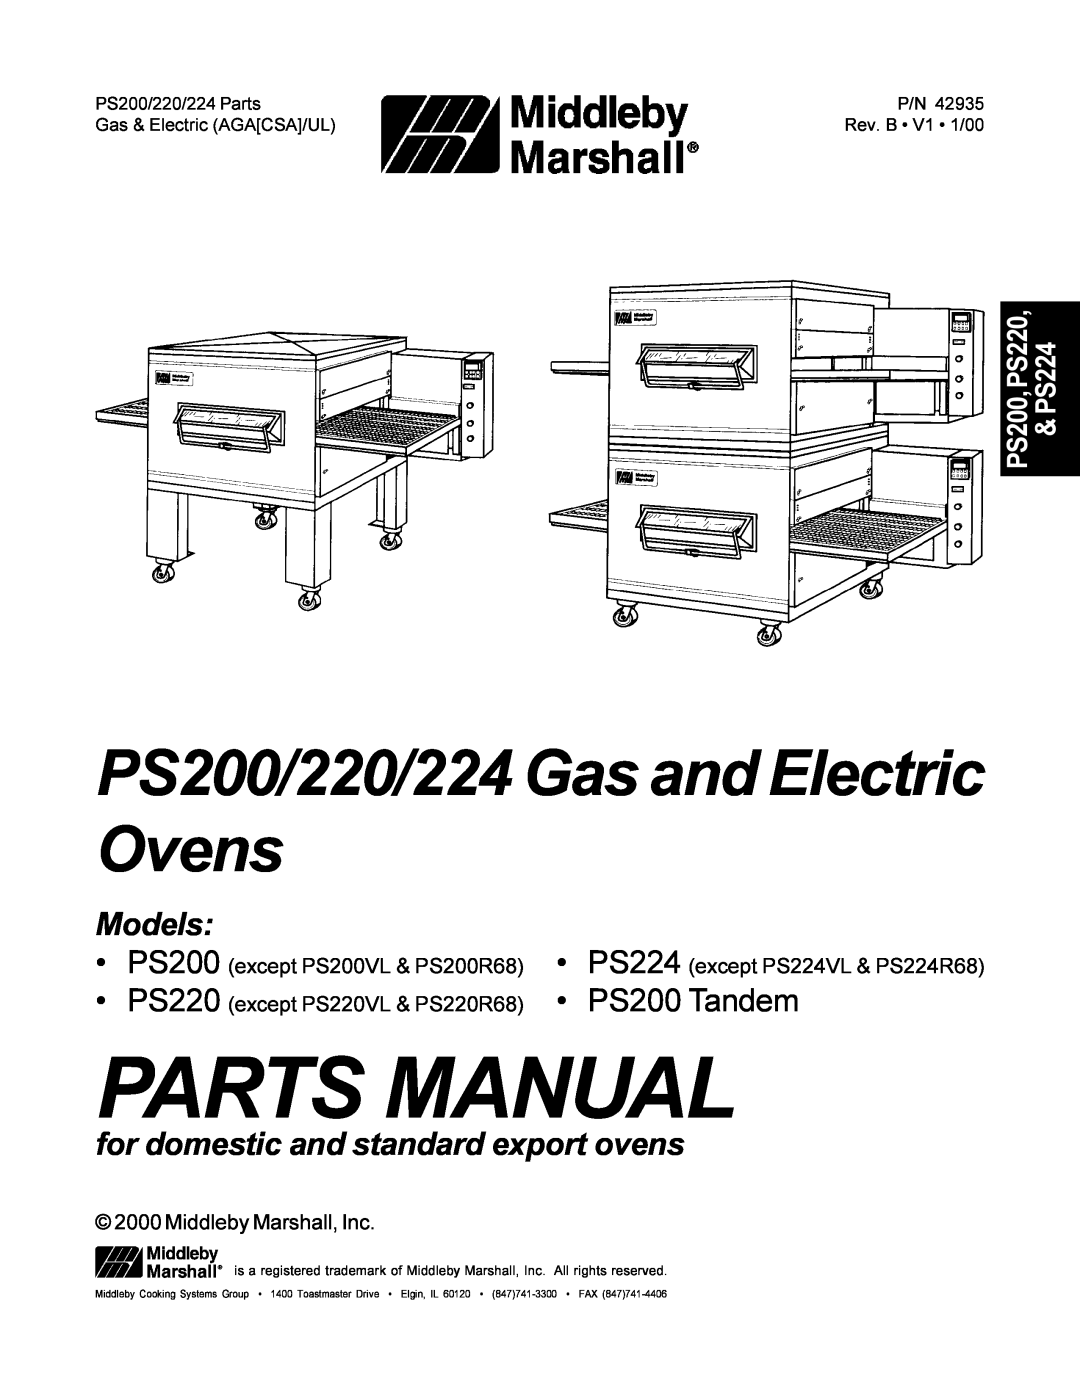 Middleby Marshall manual PS200,PS220, & PS224, Parts Manual, PS200/220/224 Gas and Electric Ovens, Models, PS200 PS220 